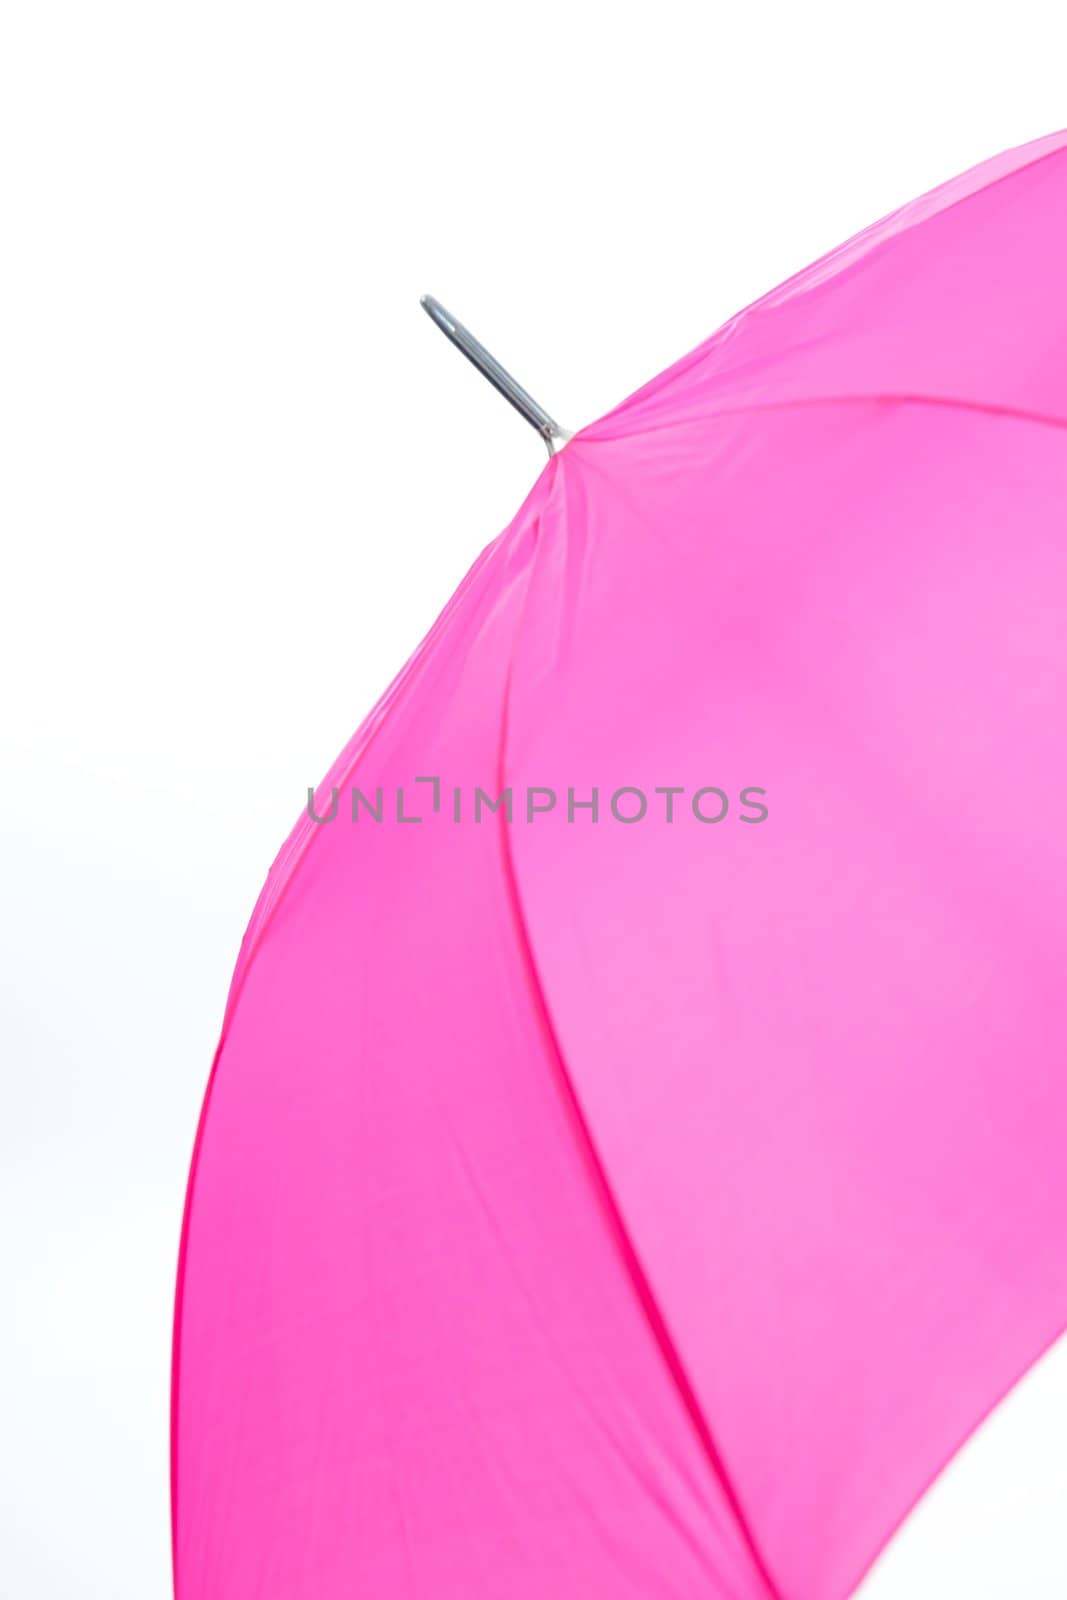 Pink Umbrella Isolated on a White Background by pixelsnap